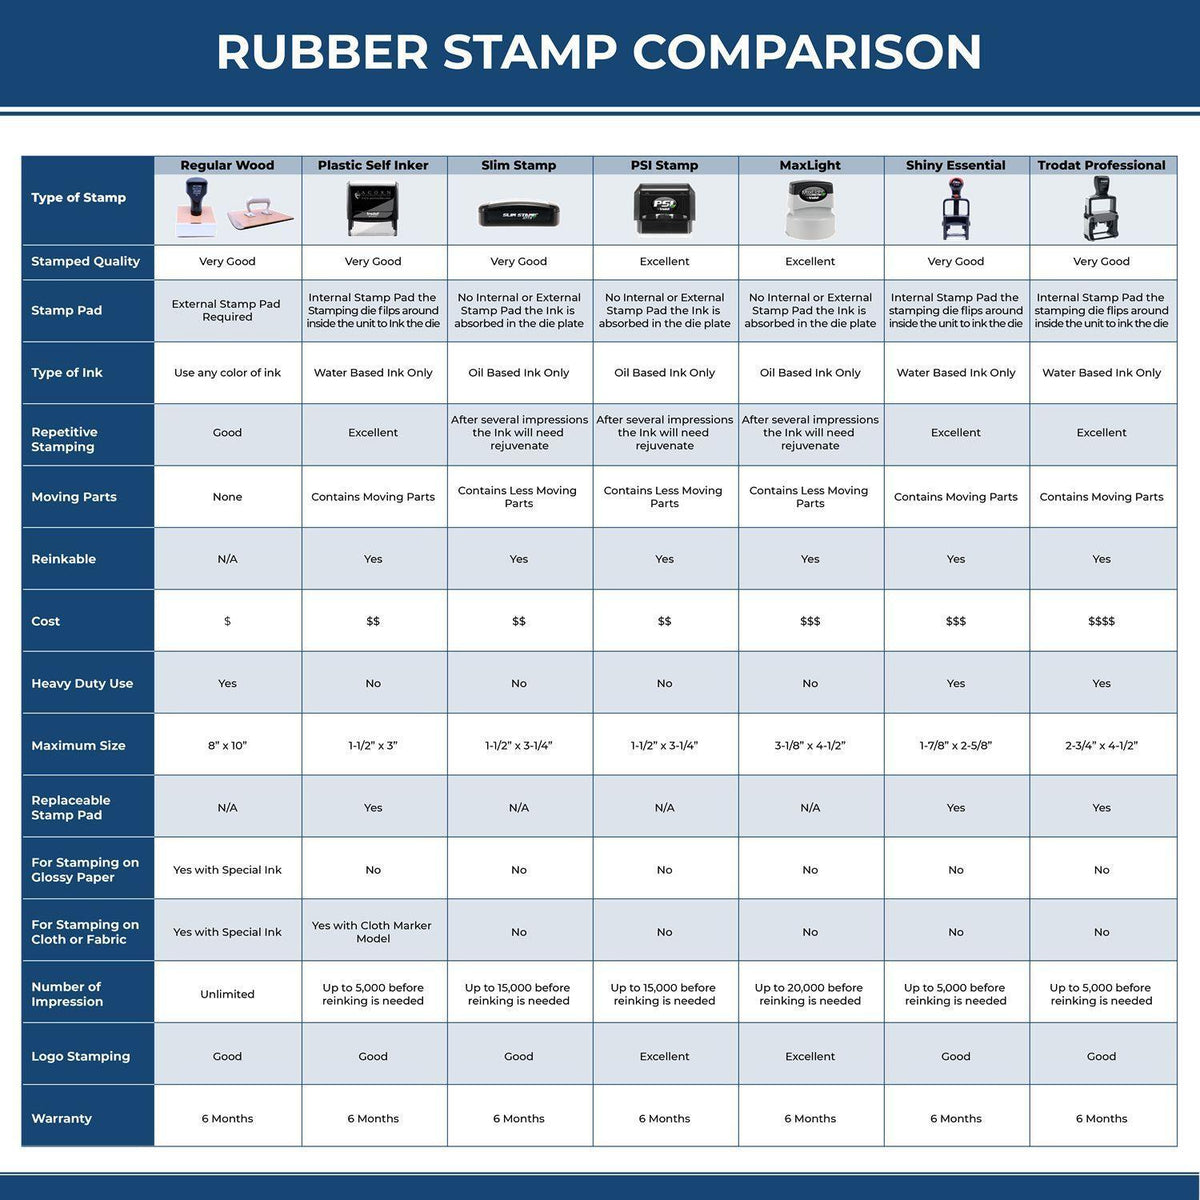 Large Narrow Void Rubber Stamp 5577R Rubber Stamp Comparison